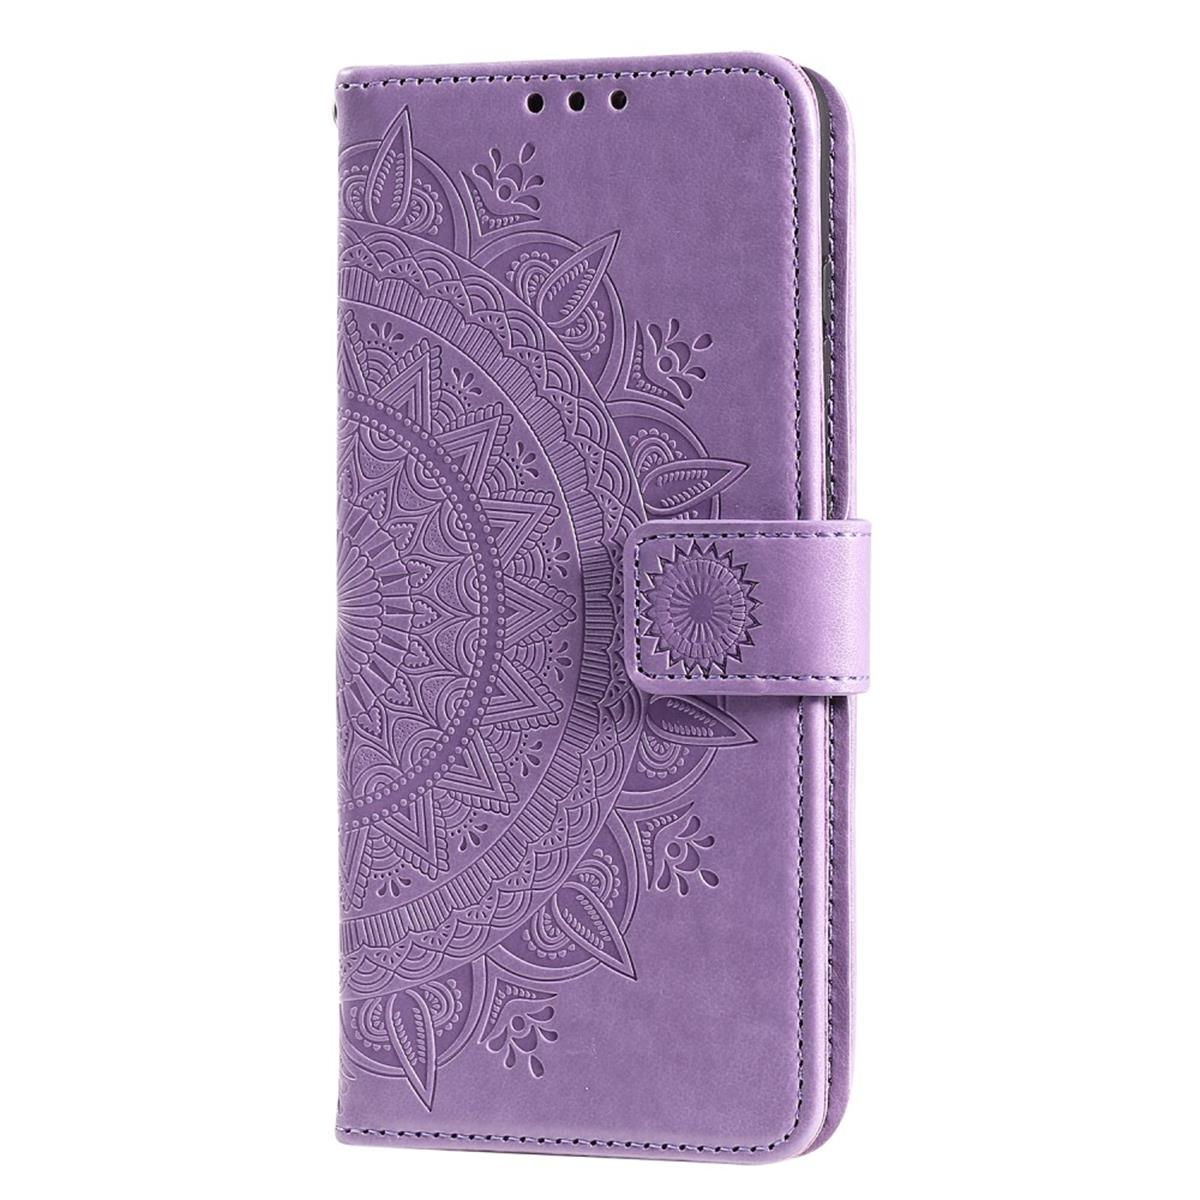 COVERKINGZ Klapphülle mit A31, Muster, Galaxy Mandala Bookcover, Lila Samsung